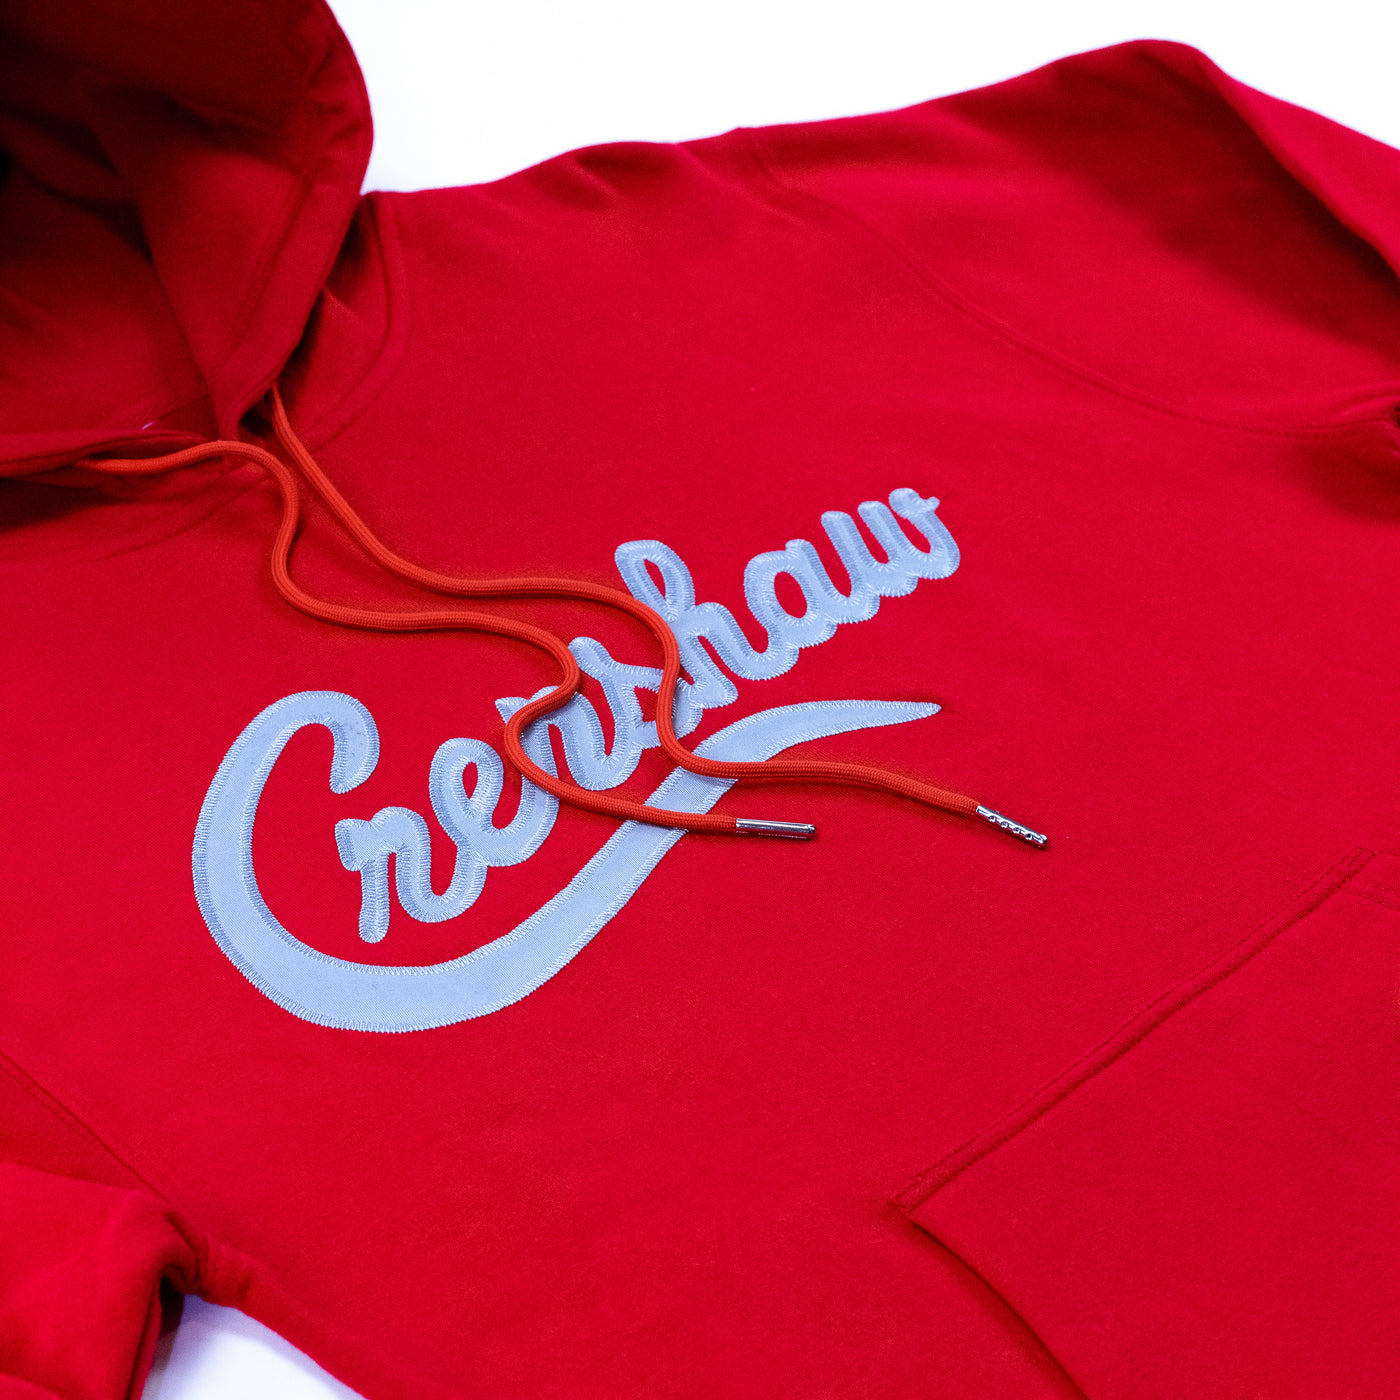 Crenshaw Limited Edition Hoodie - Red/Grey Detail 1